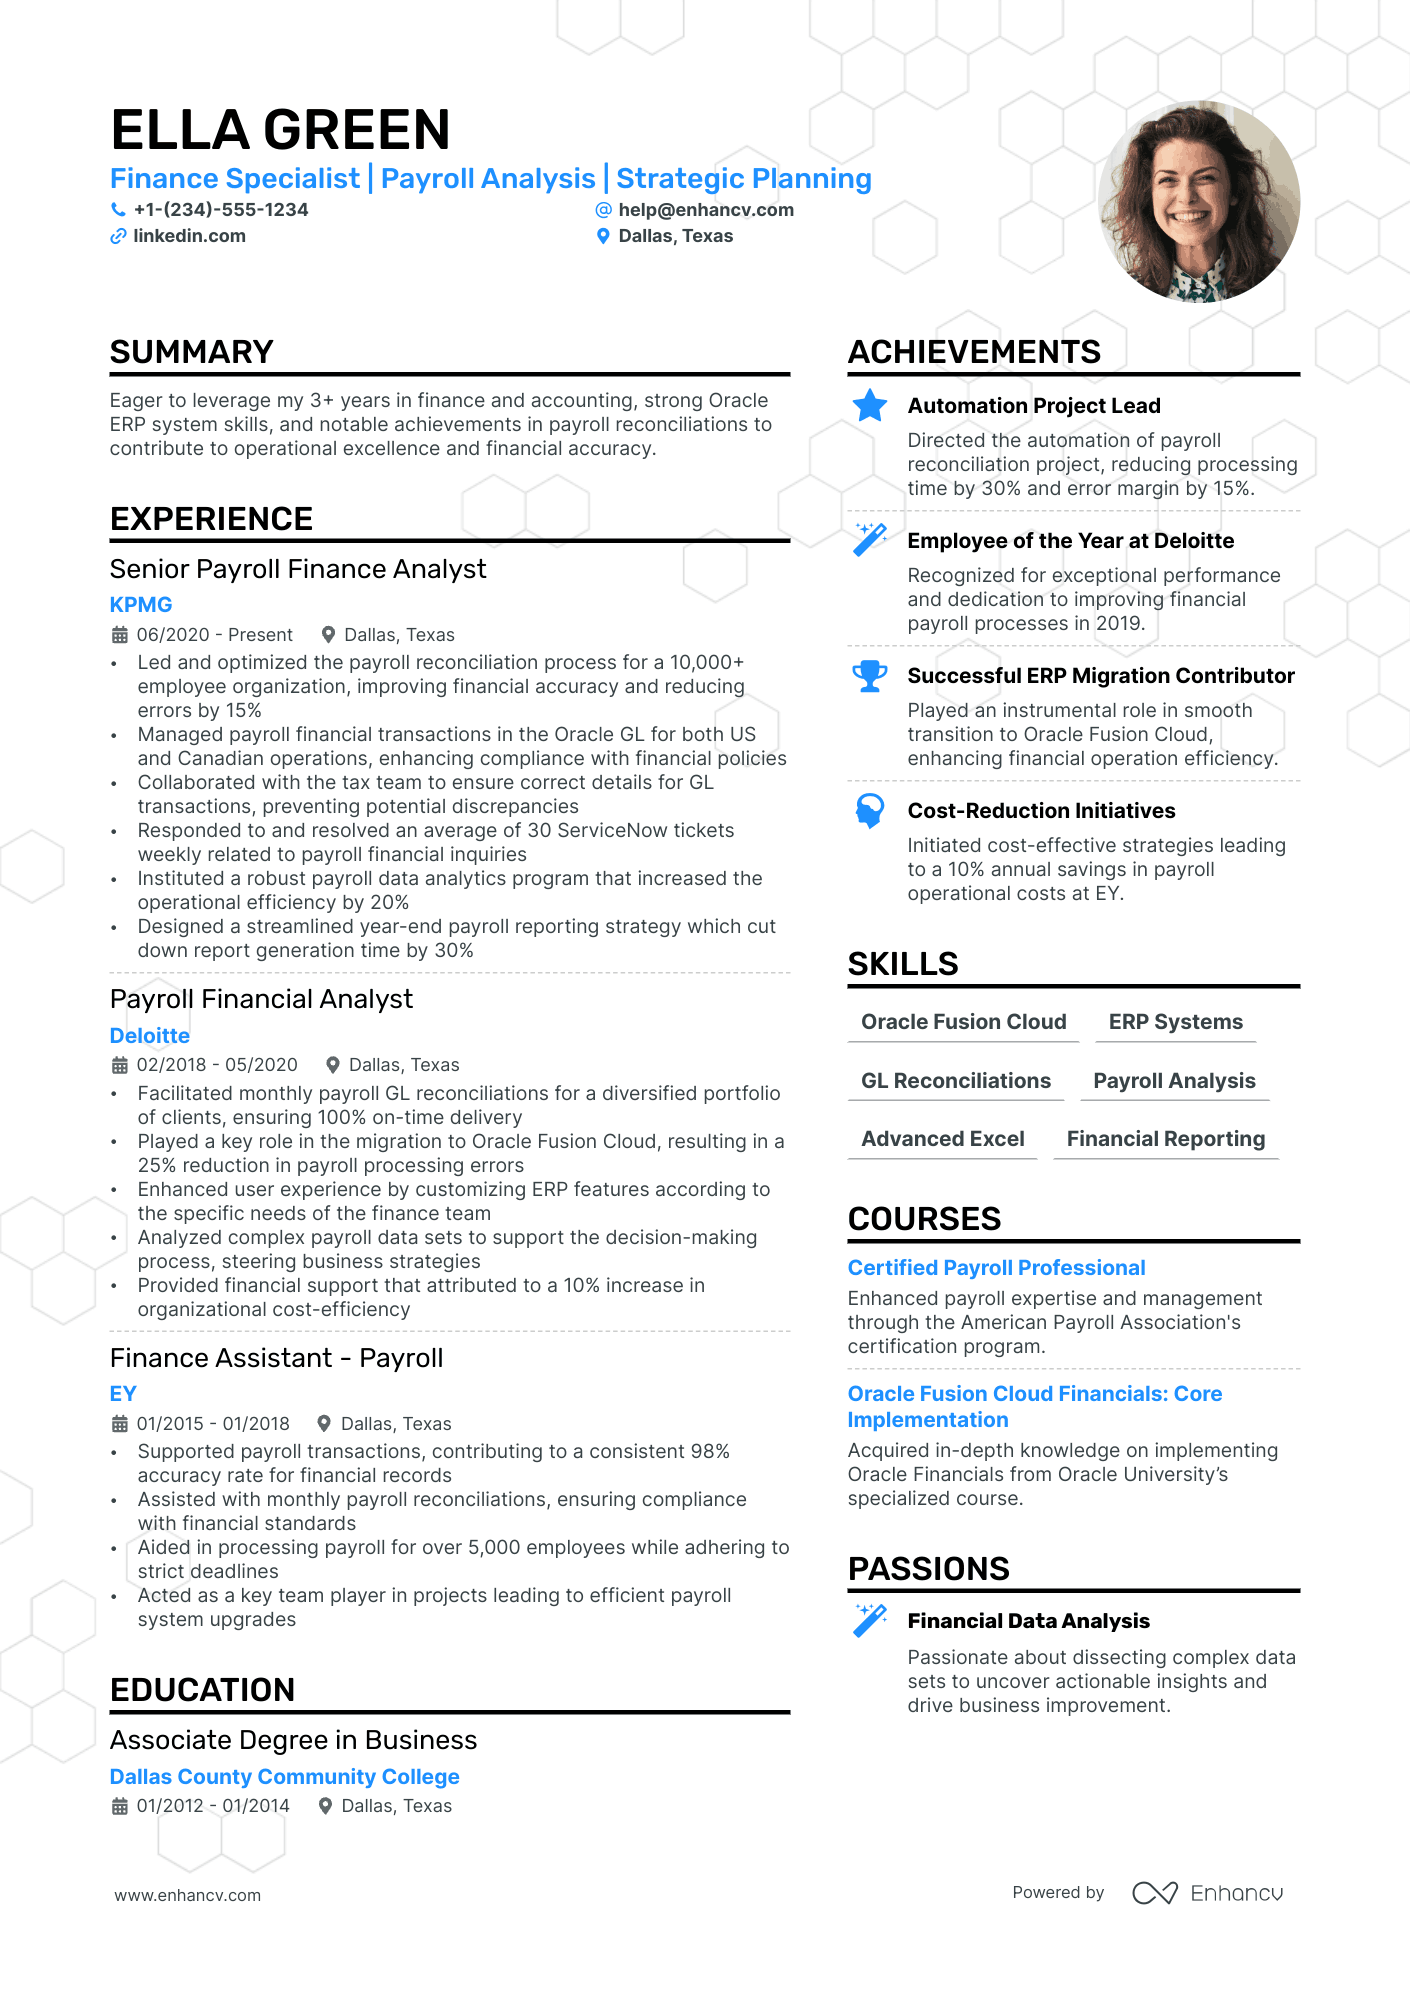 Financial Management Specialist resume example